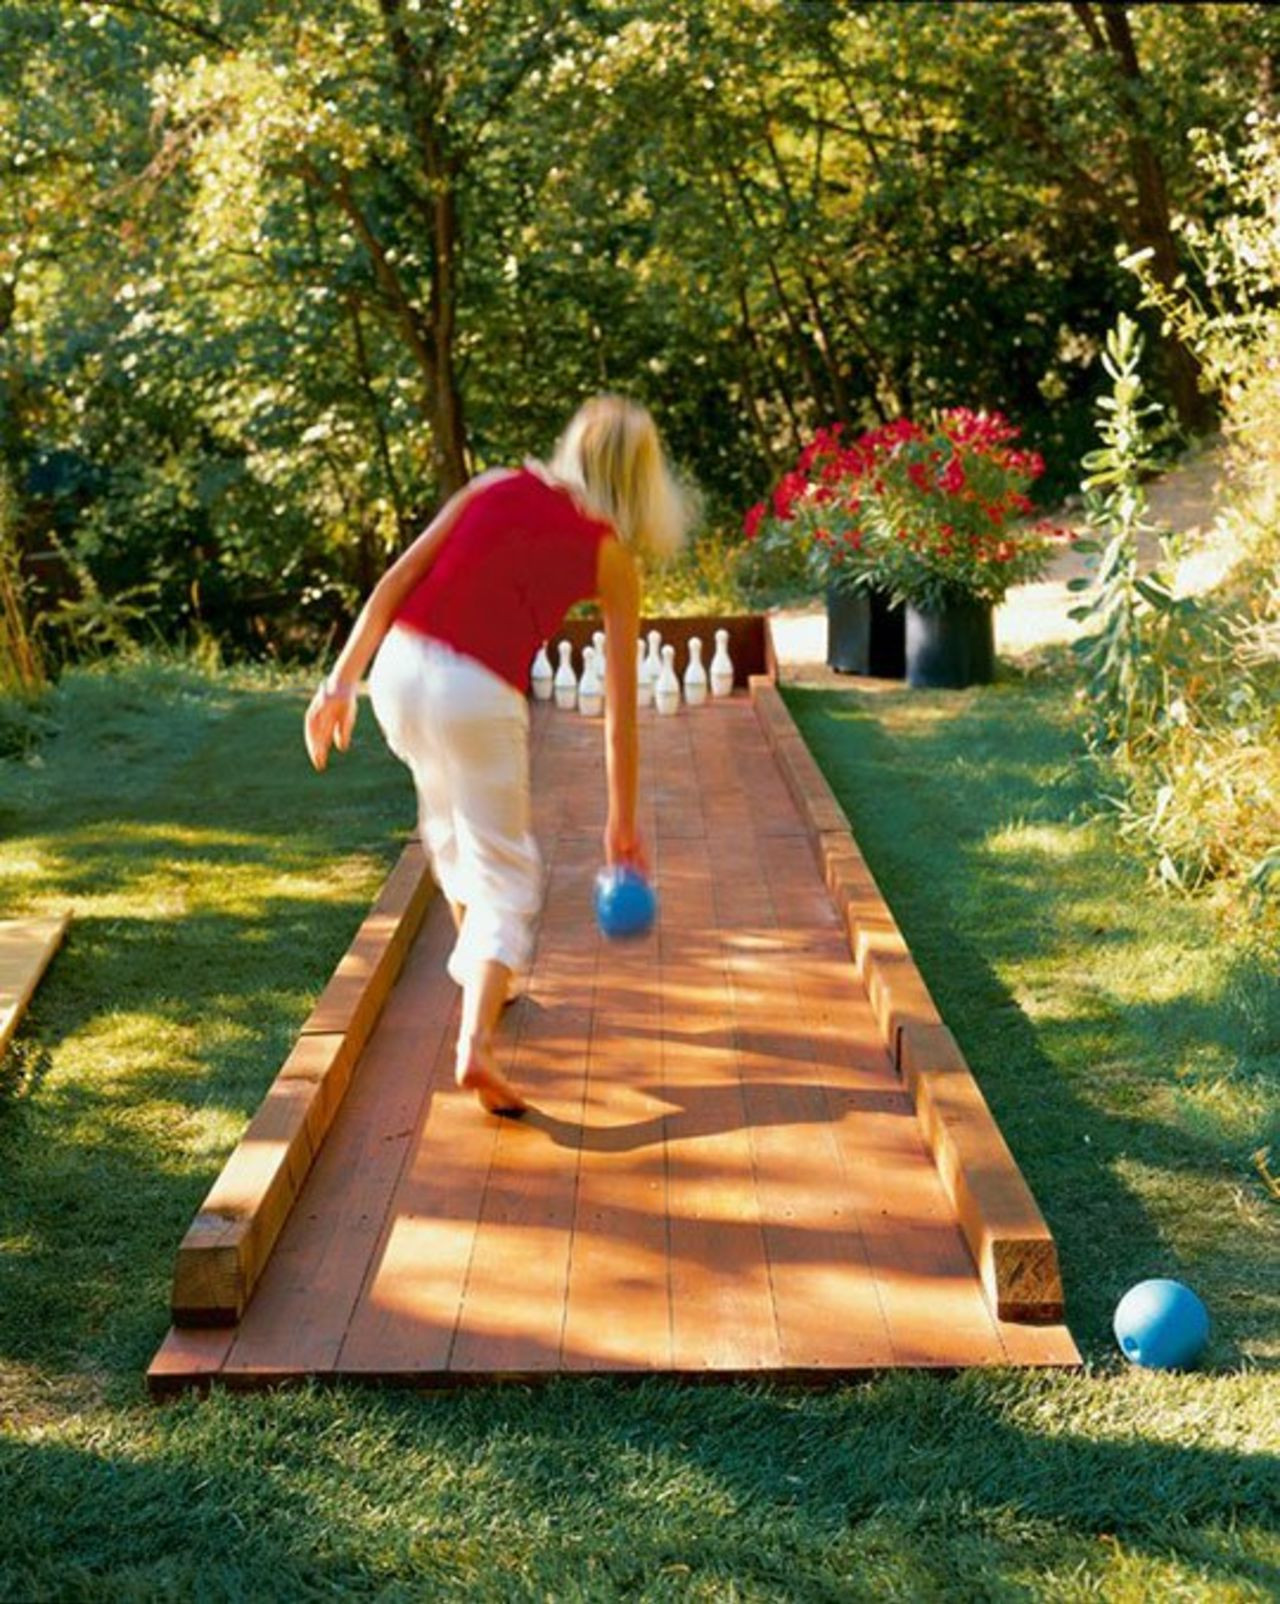 Outdoor Bowling Alley DIY
 14 DIY Backyard Games to Turn Your Party Up